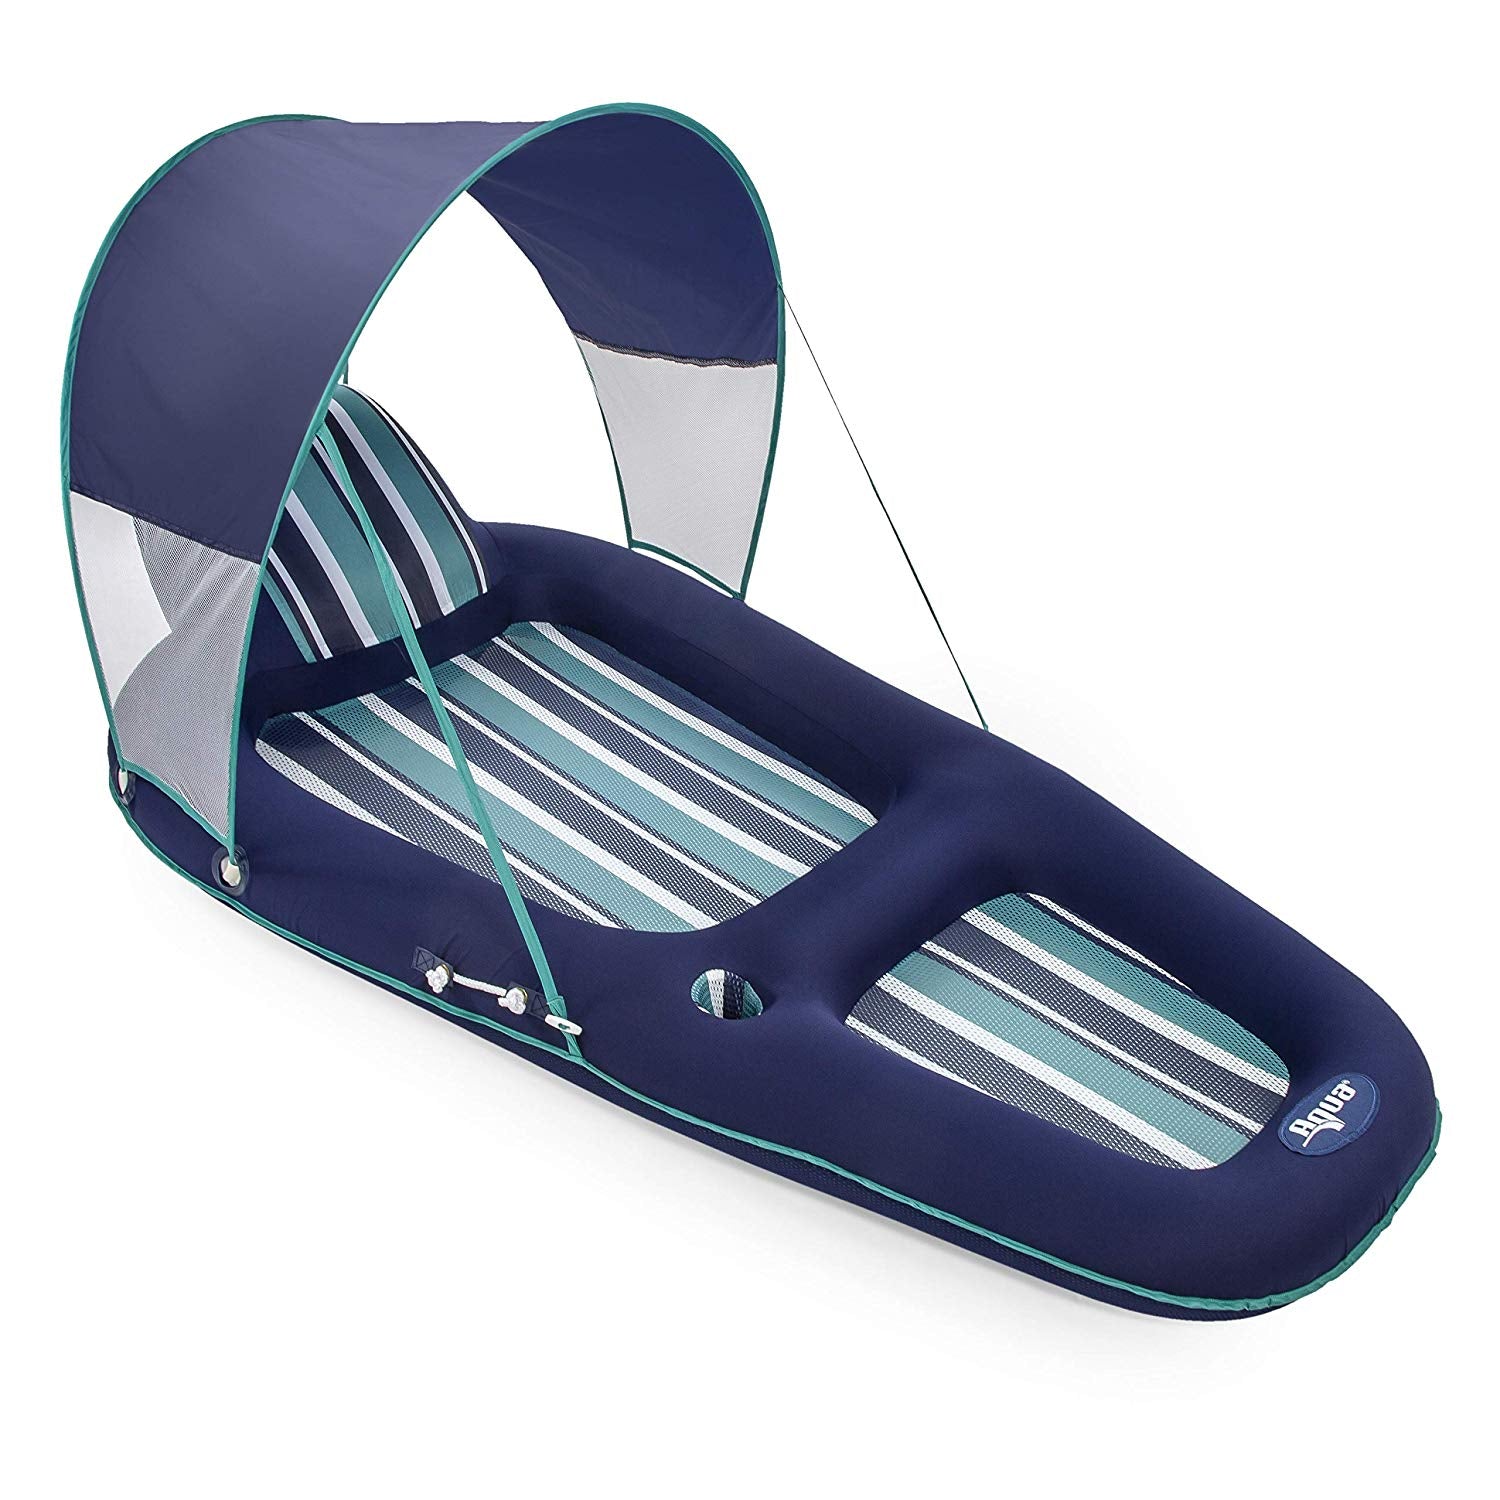 Aqua-Leisure-Luxurious-Inflatable-Pool-Lounger-Float-w/-Sunshade-Canopy,-Blue-Pool-Floats-&-Loungers